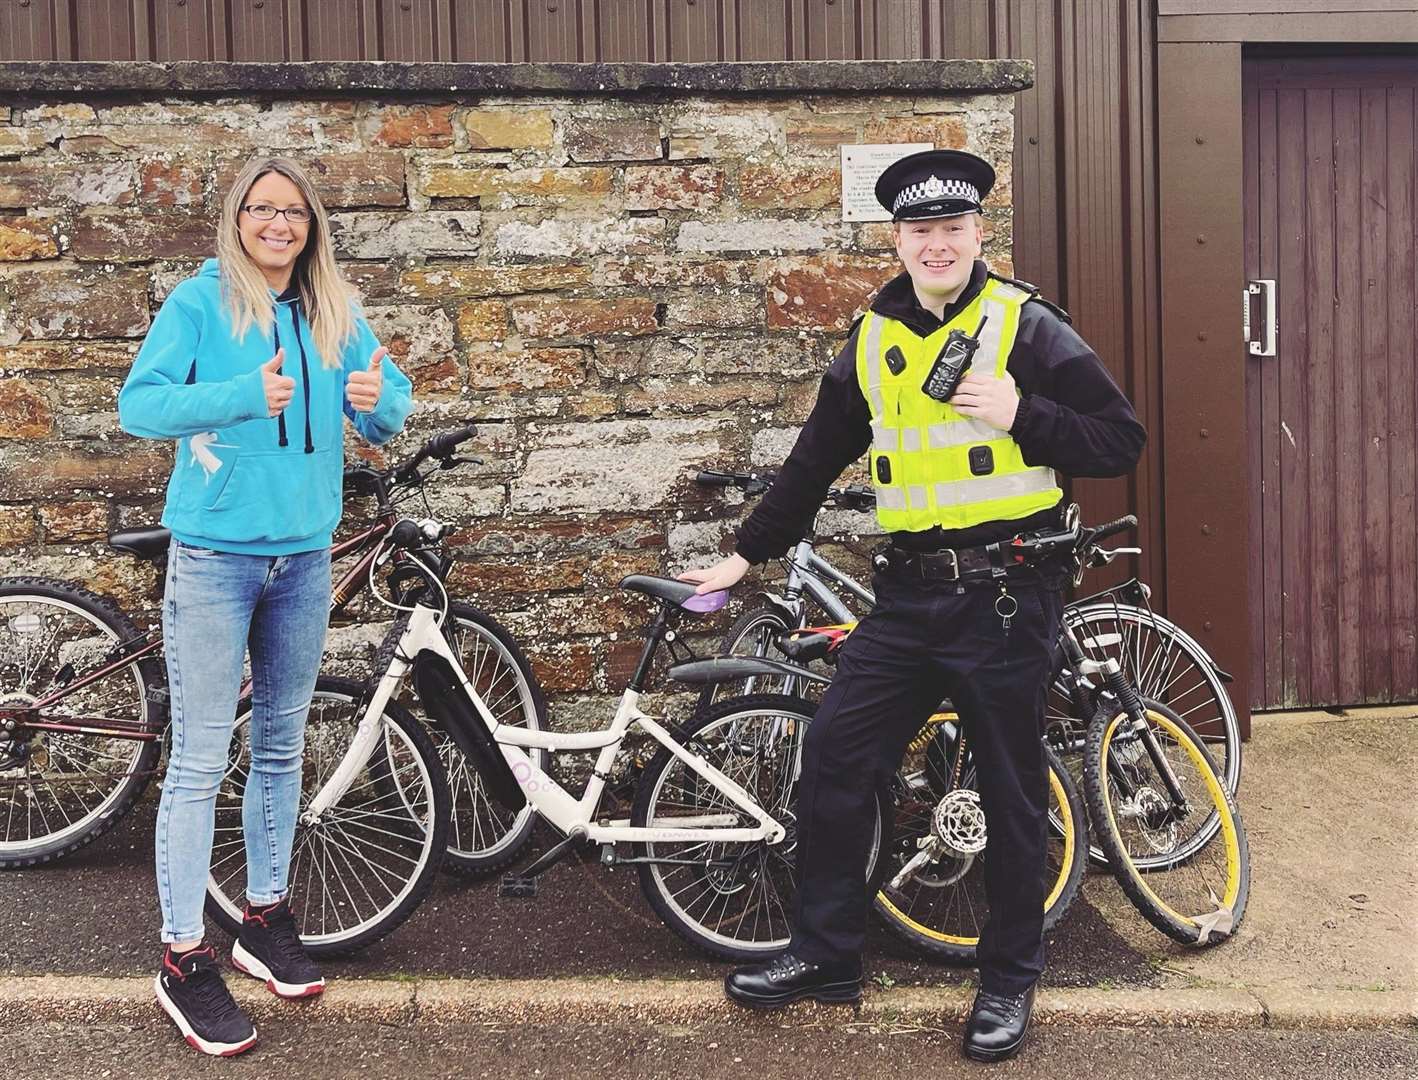 PC Matthew Thain with Jill Innes of High Life Highland with some of the donated bikes at Thurso High School.